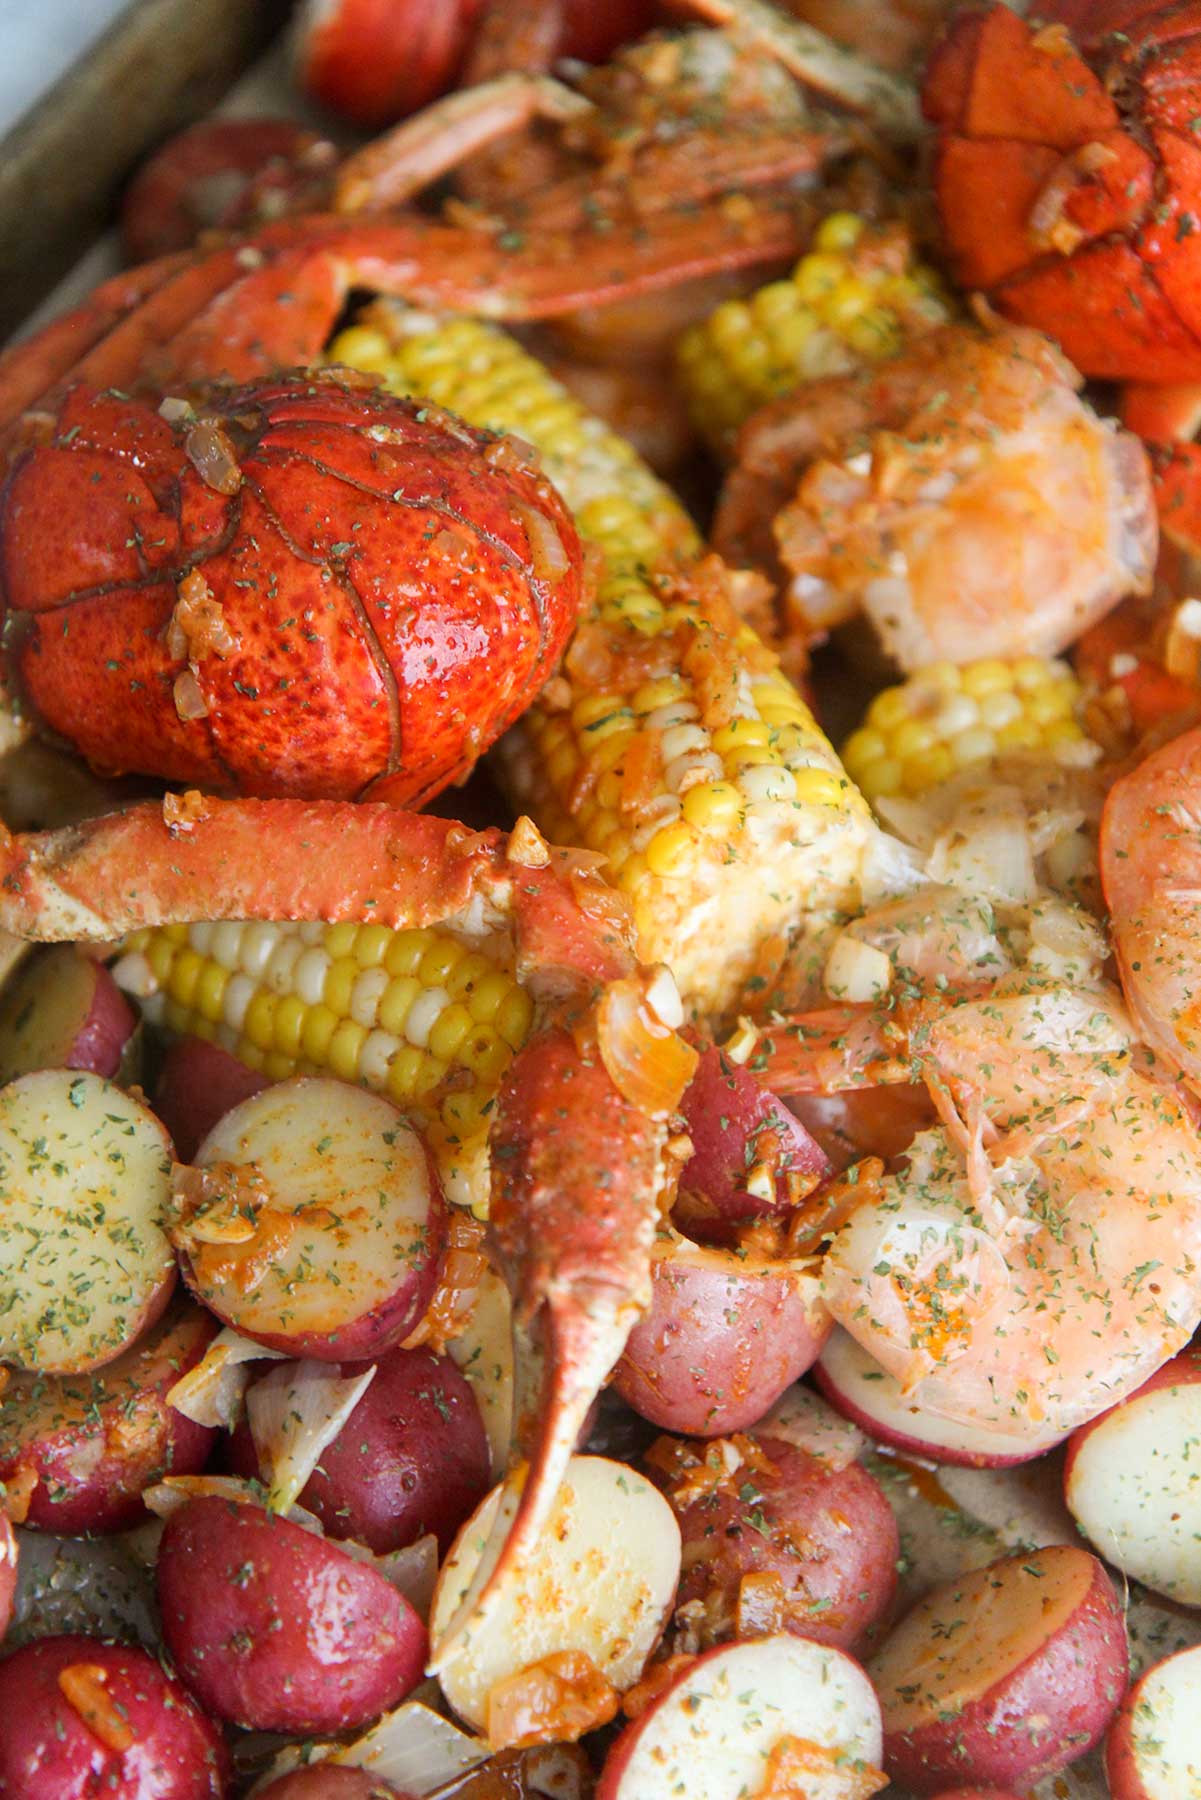 Cajun Seafood Boil Recipe (Video) - Cooked by Julie